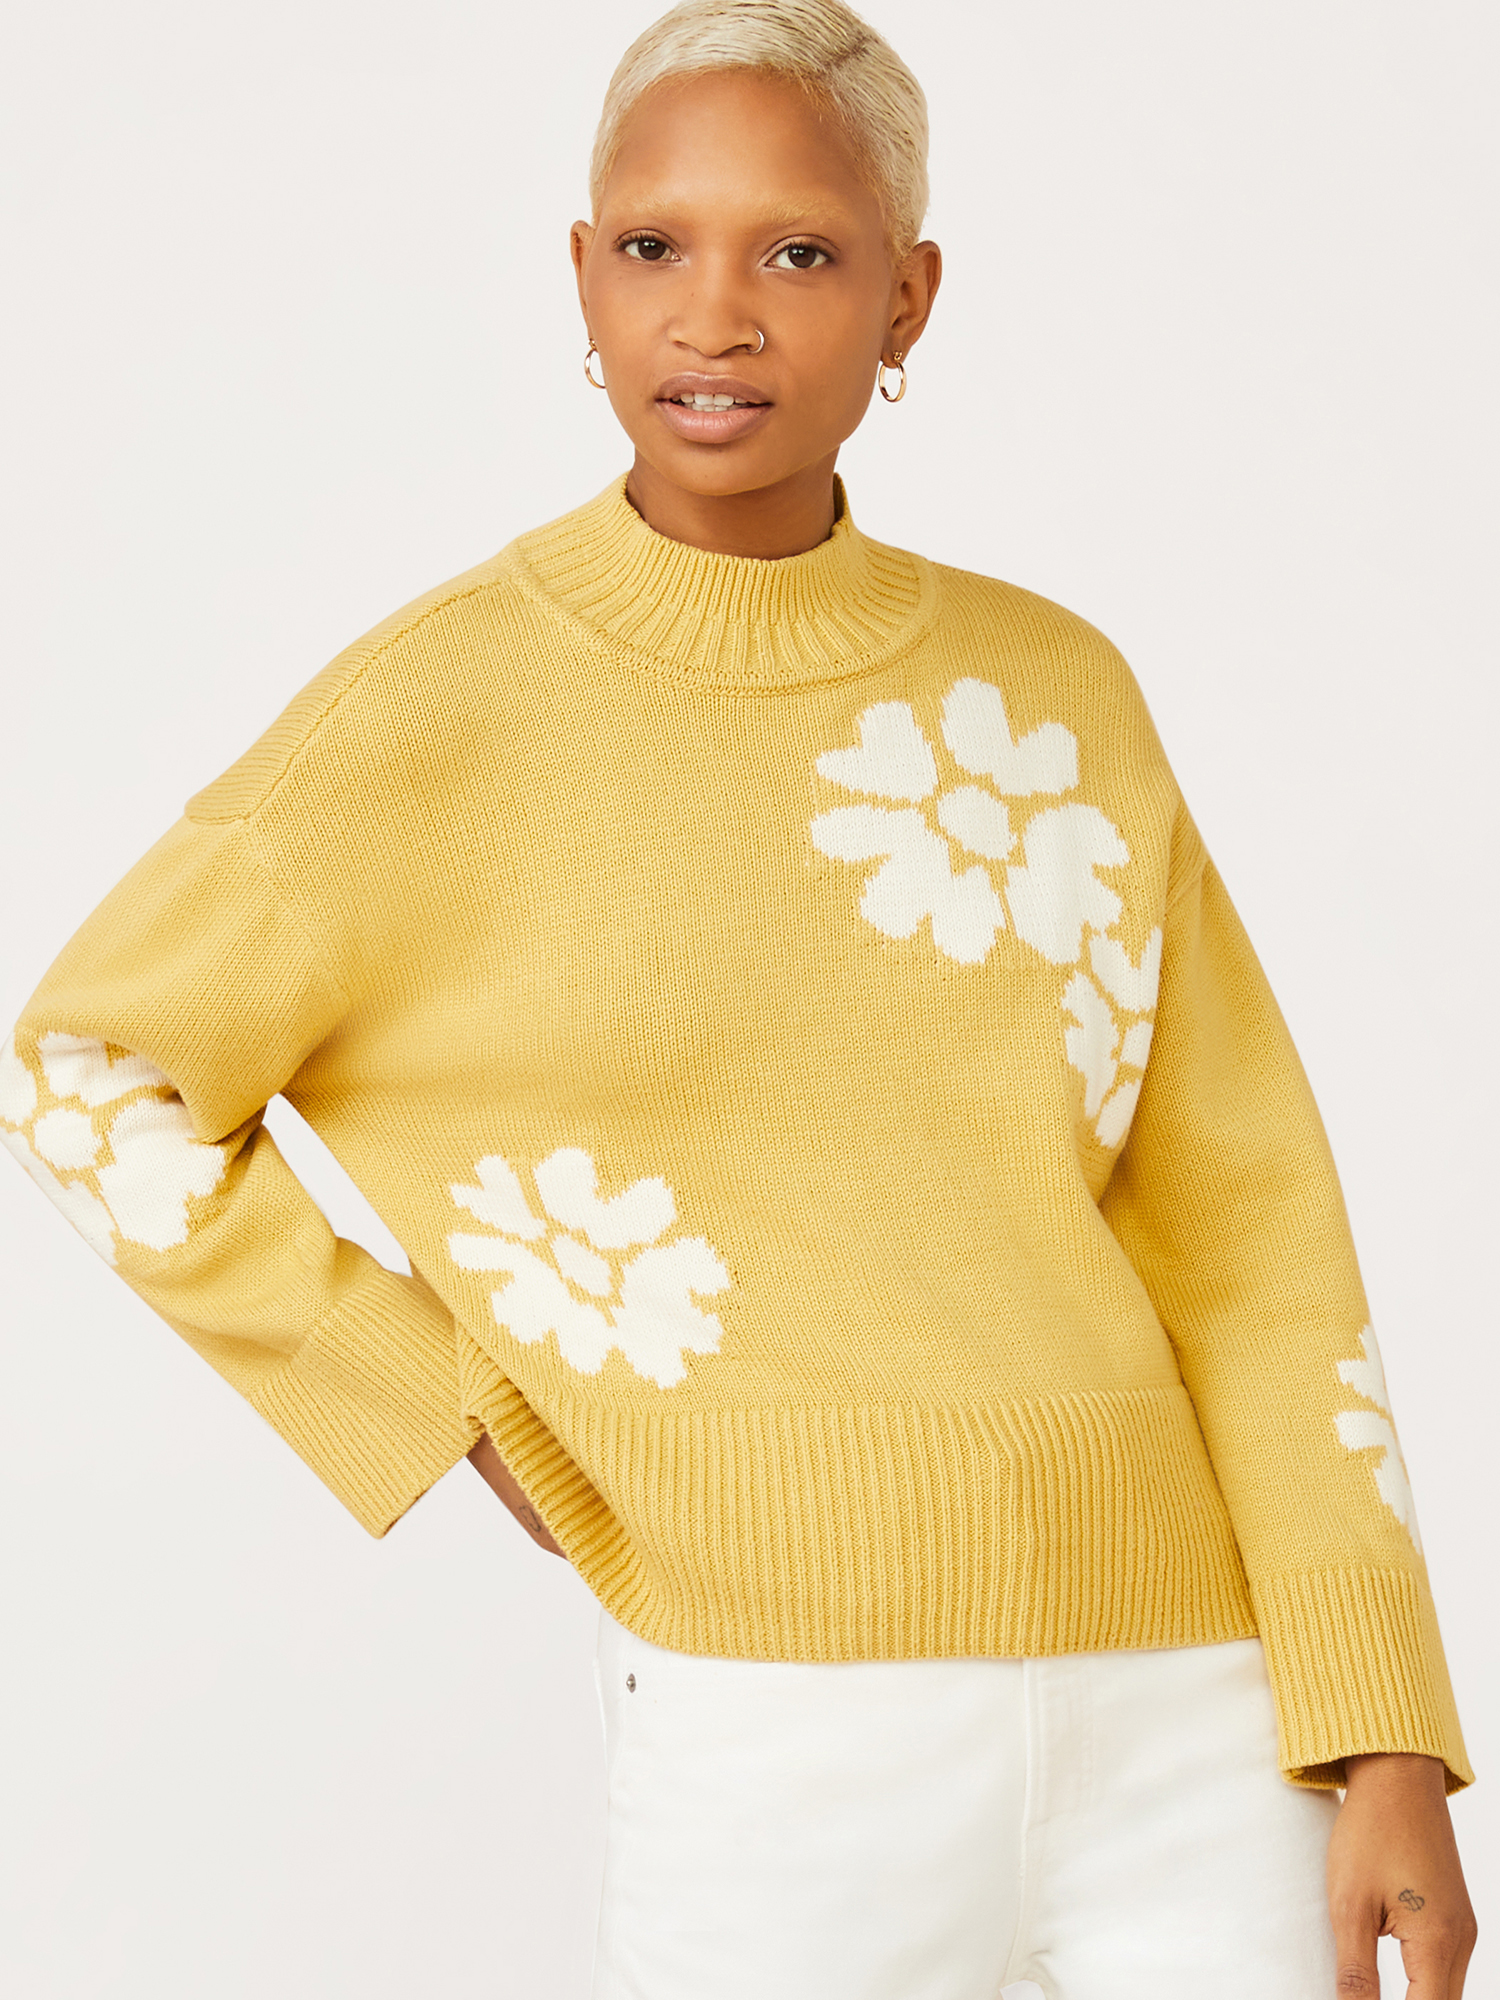 Free Assembly Women’s Mock Neck Sweater with Long Sleeves - image 1 of 8